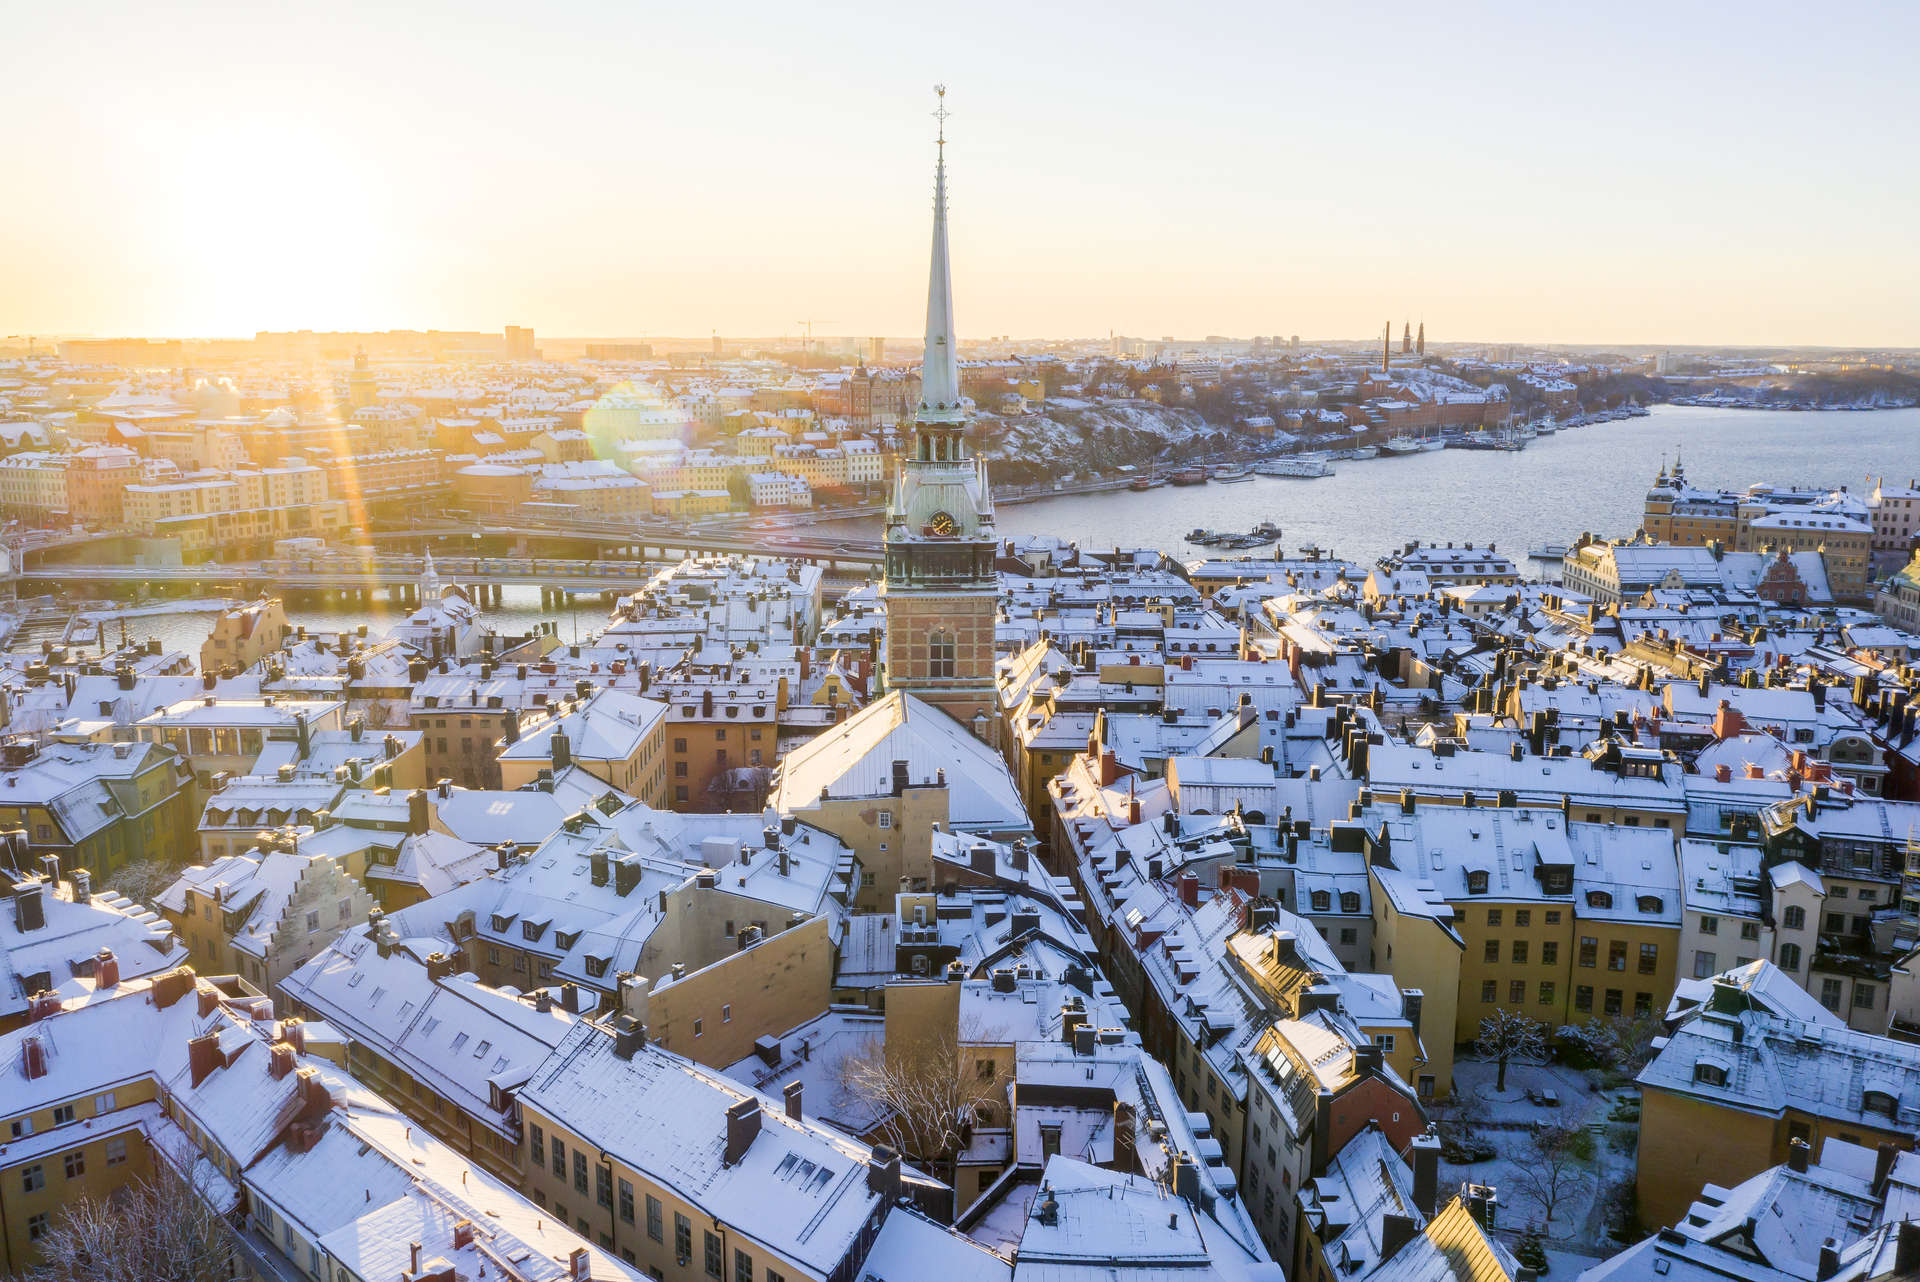 January is the ideal time to experience Stockholm